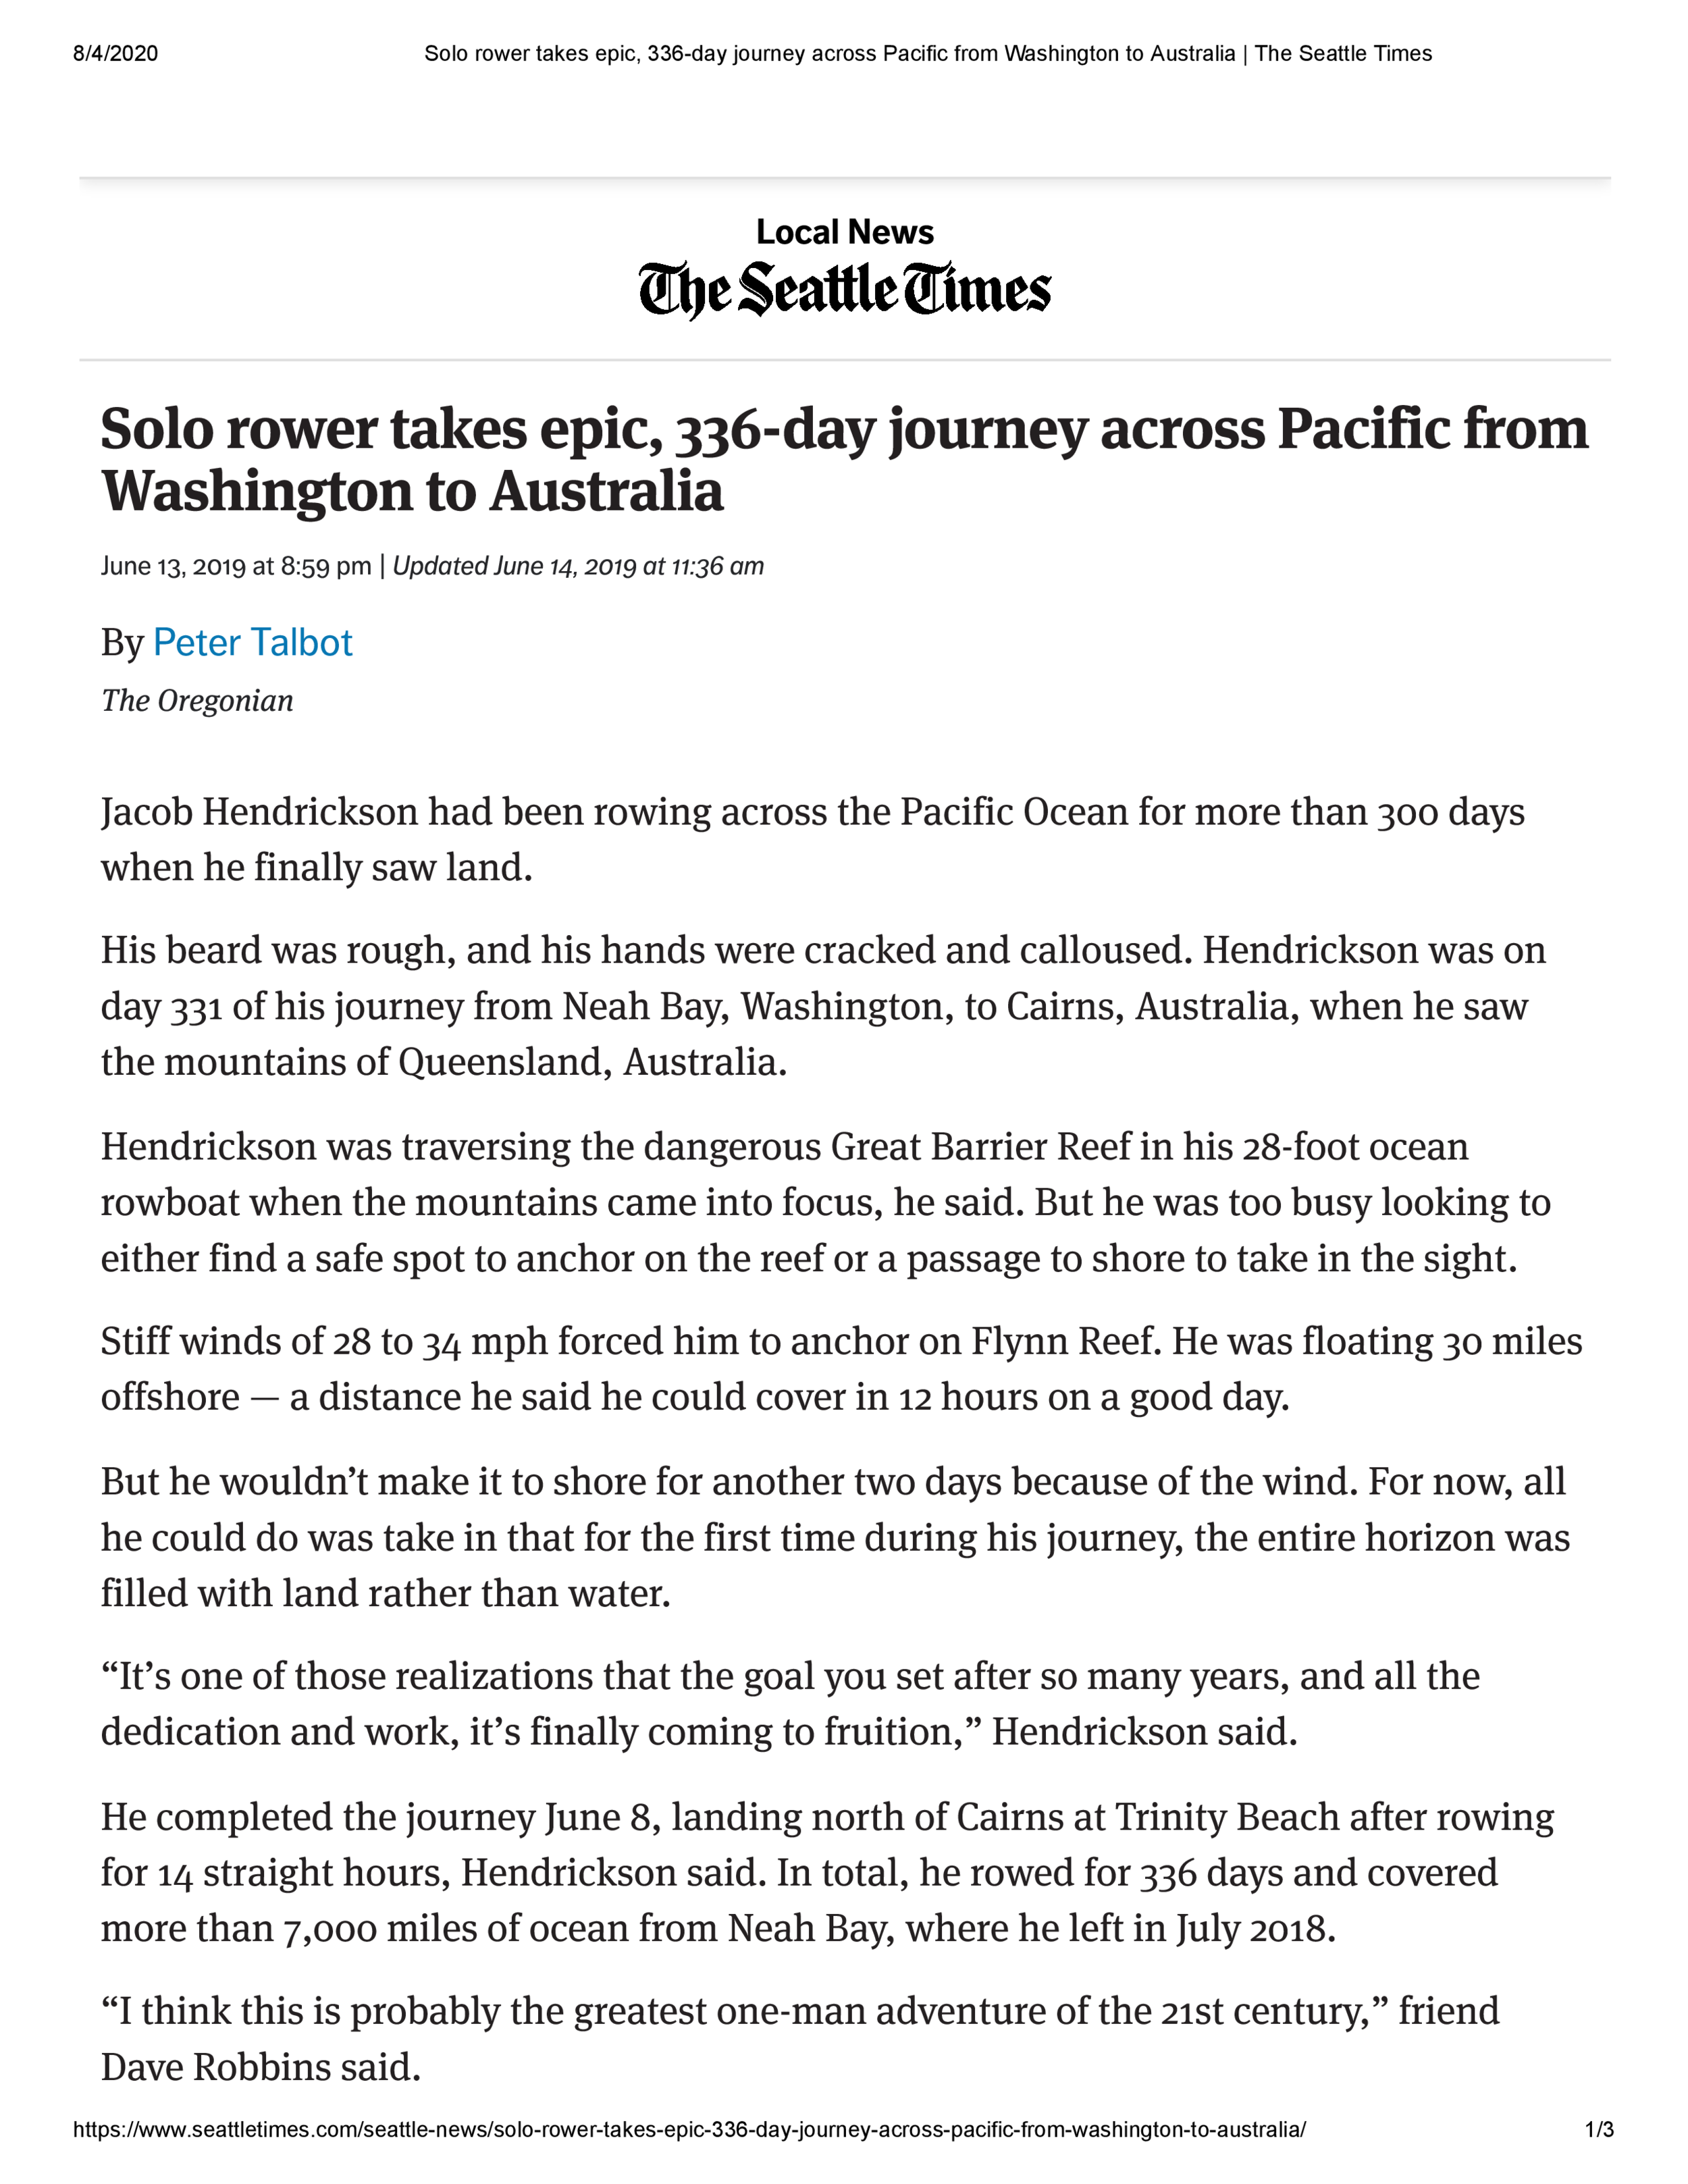 Seattle Times_1.png